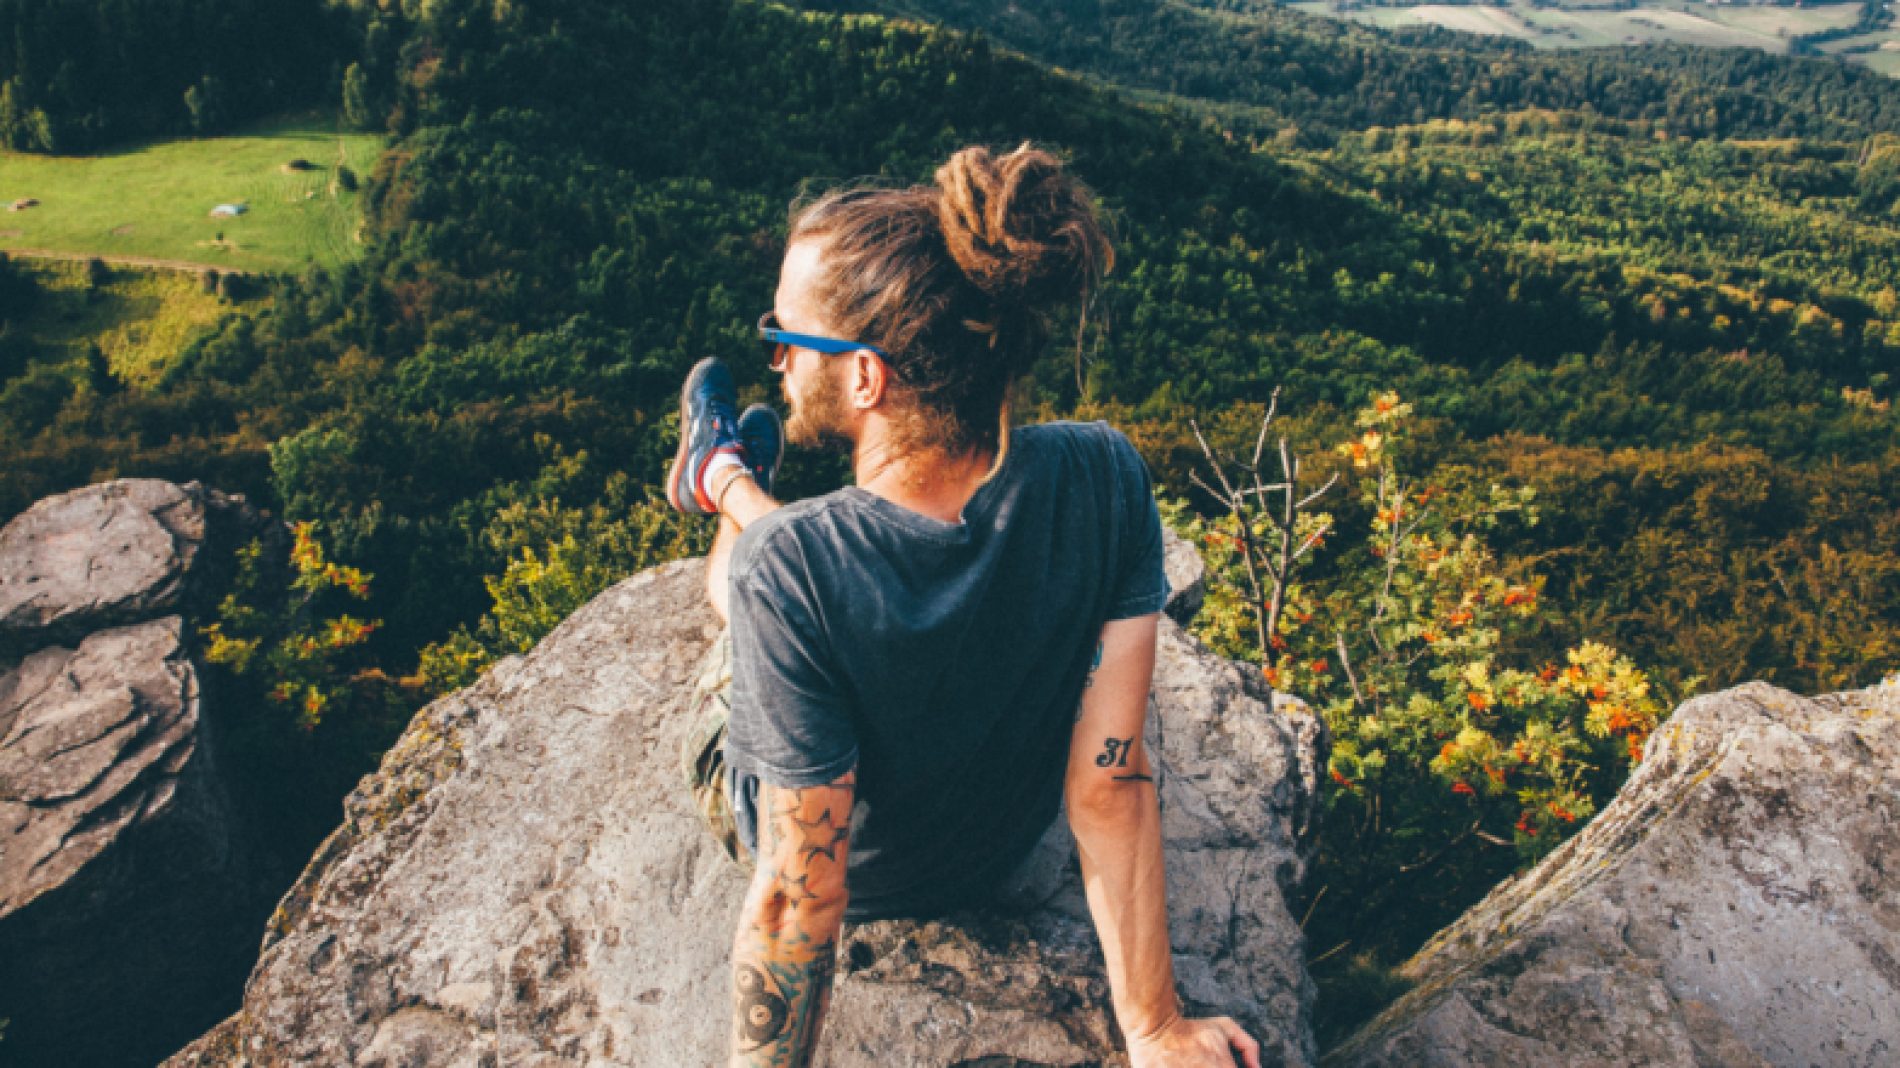 nature-forest-rock-sitting-landscape-young-man-man-tattoos_t20_7J7g26-YYAwrd